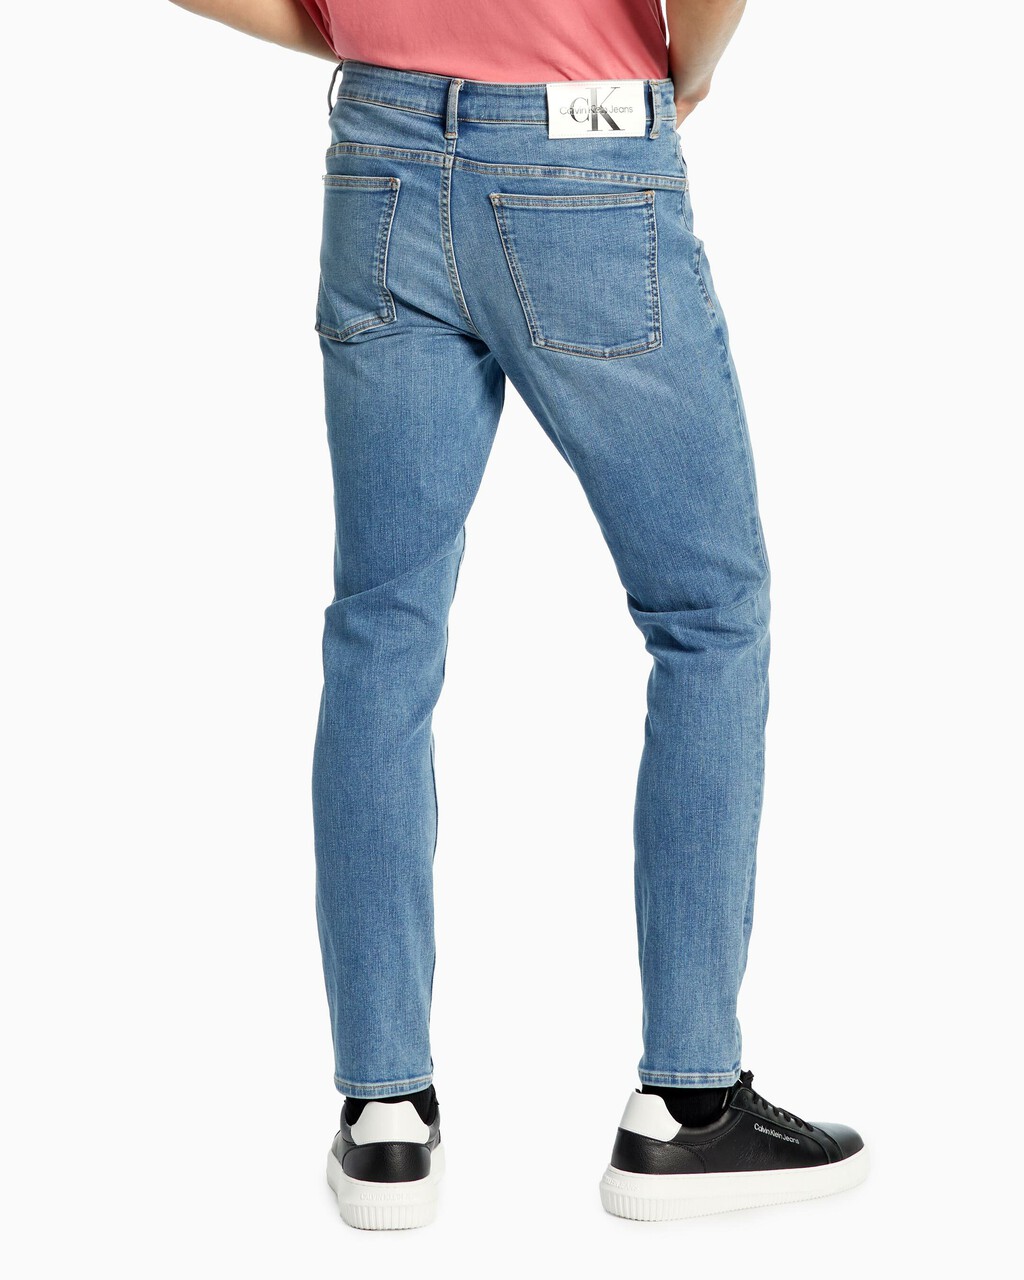 SUSTAINABLE BODY SKINNY JEANS, Light Blue, hi-res